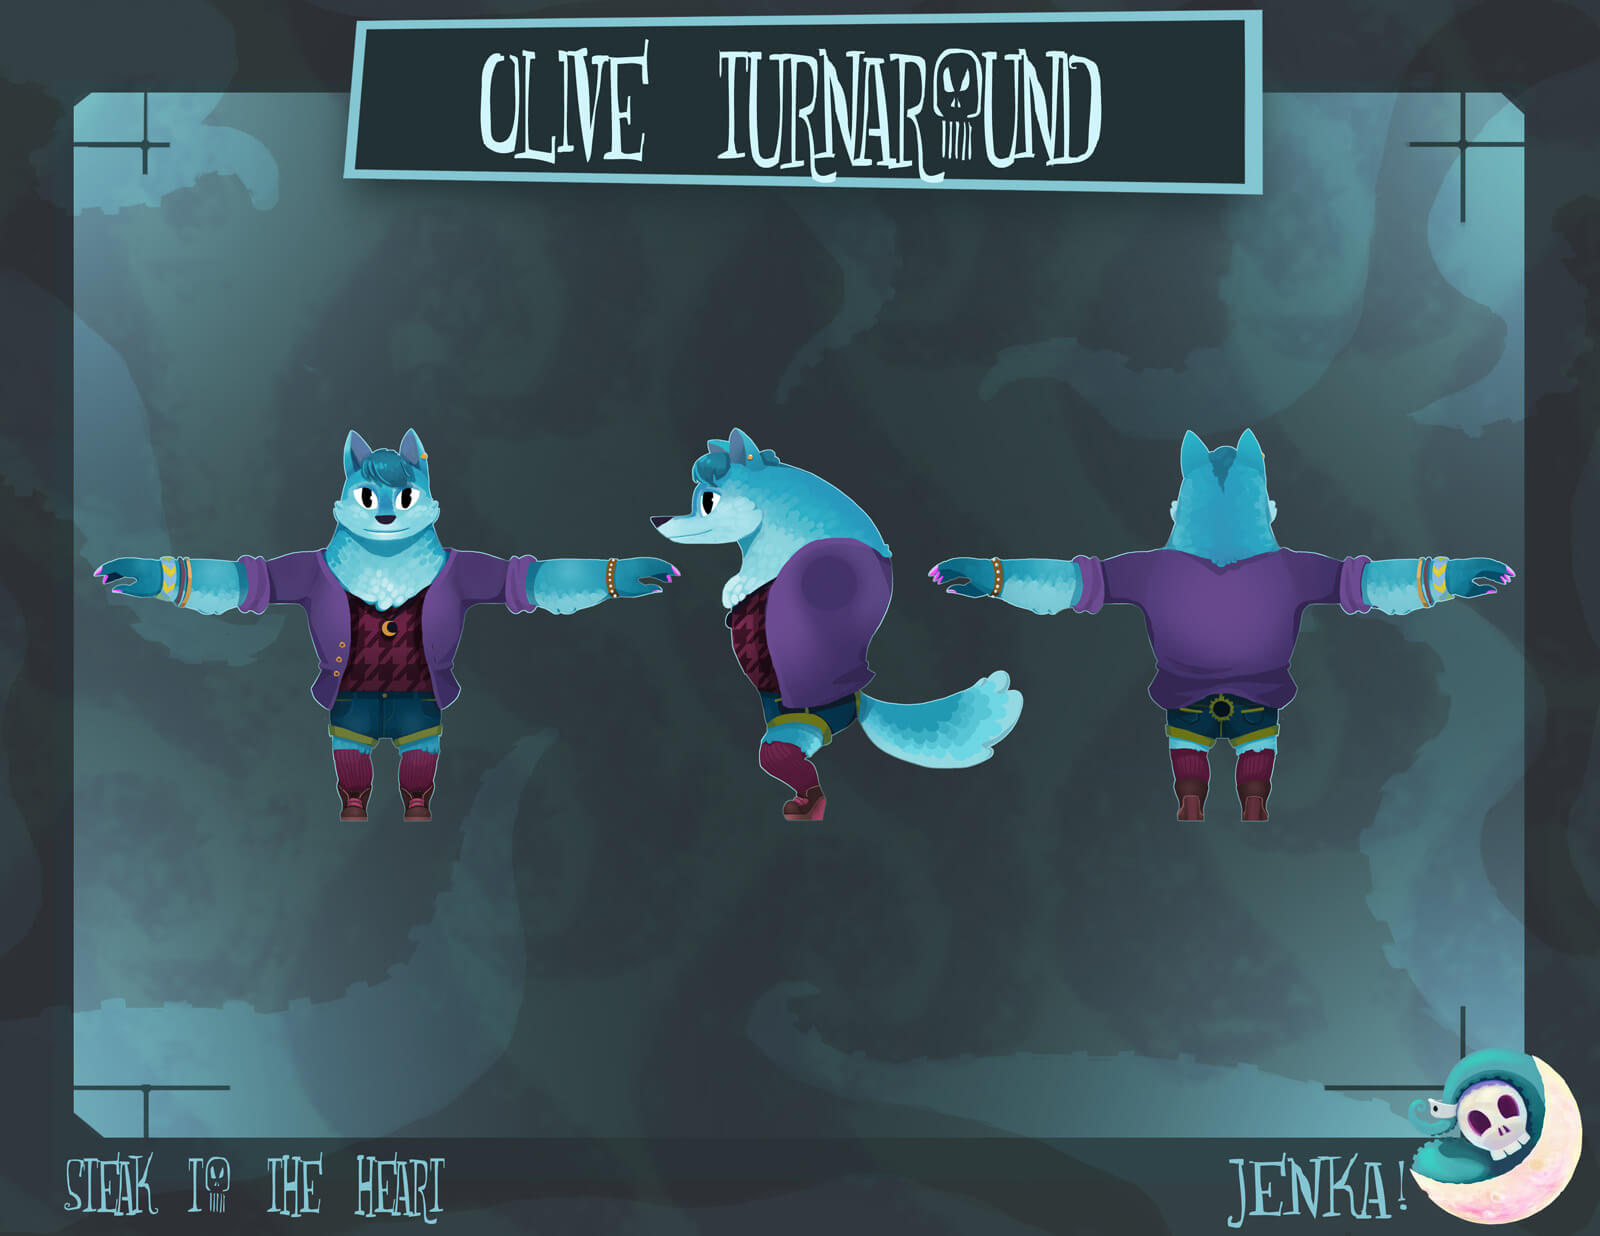 Three final designs of a blue werewolf from the film Steak to the Heart from the front, side, and back